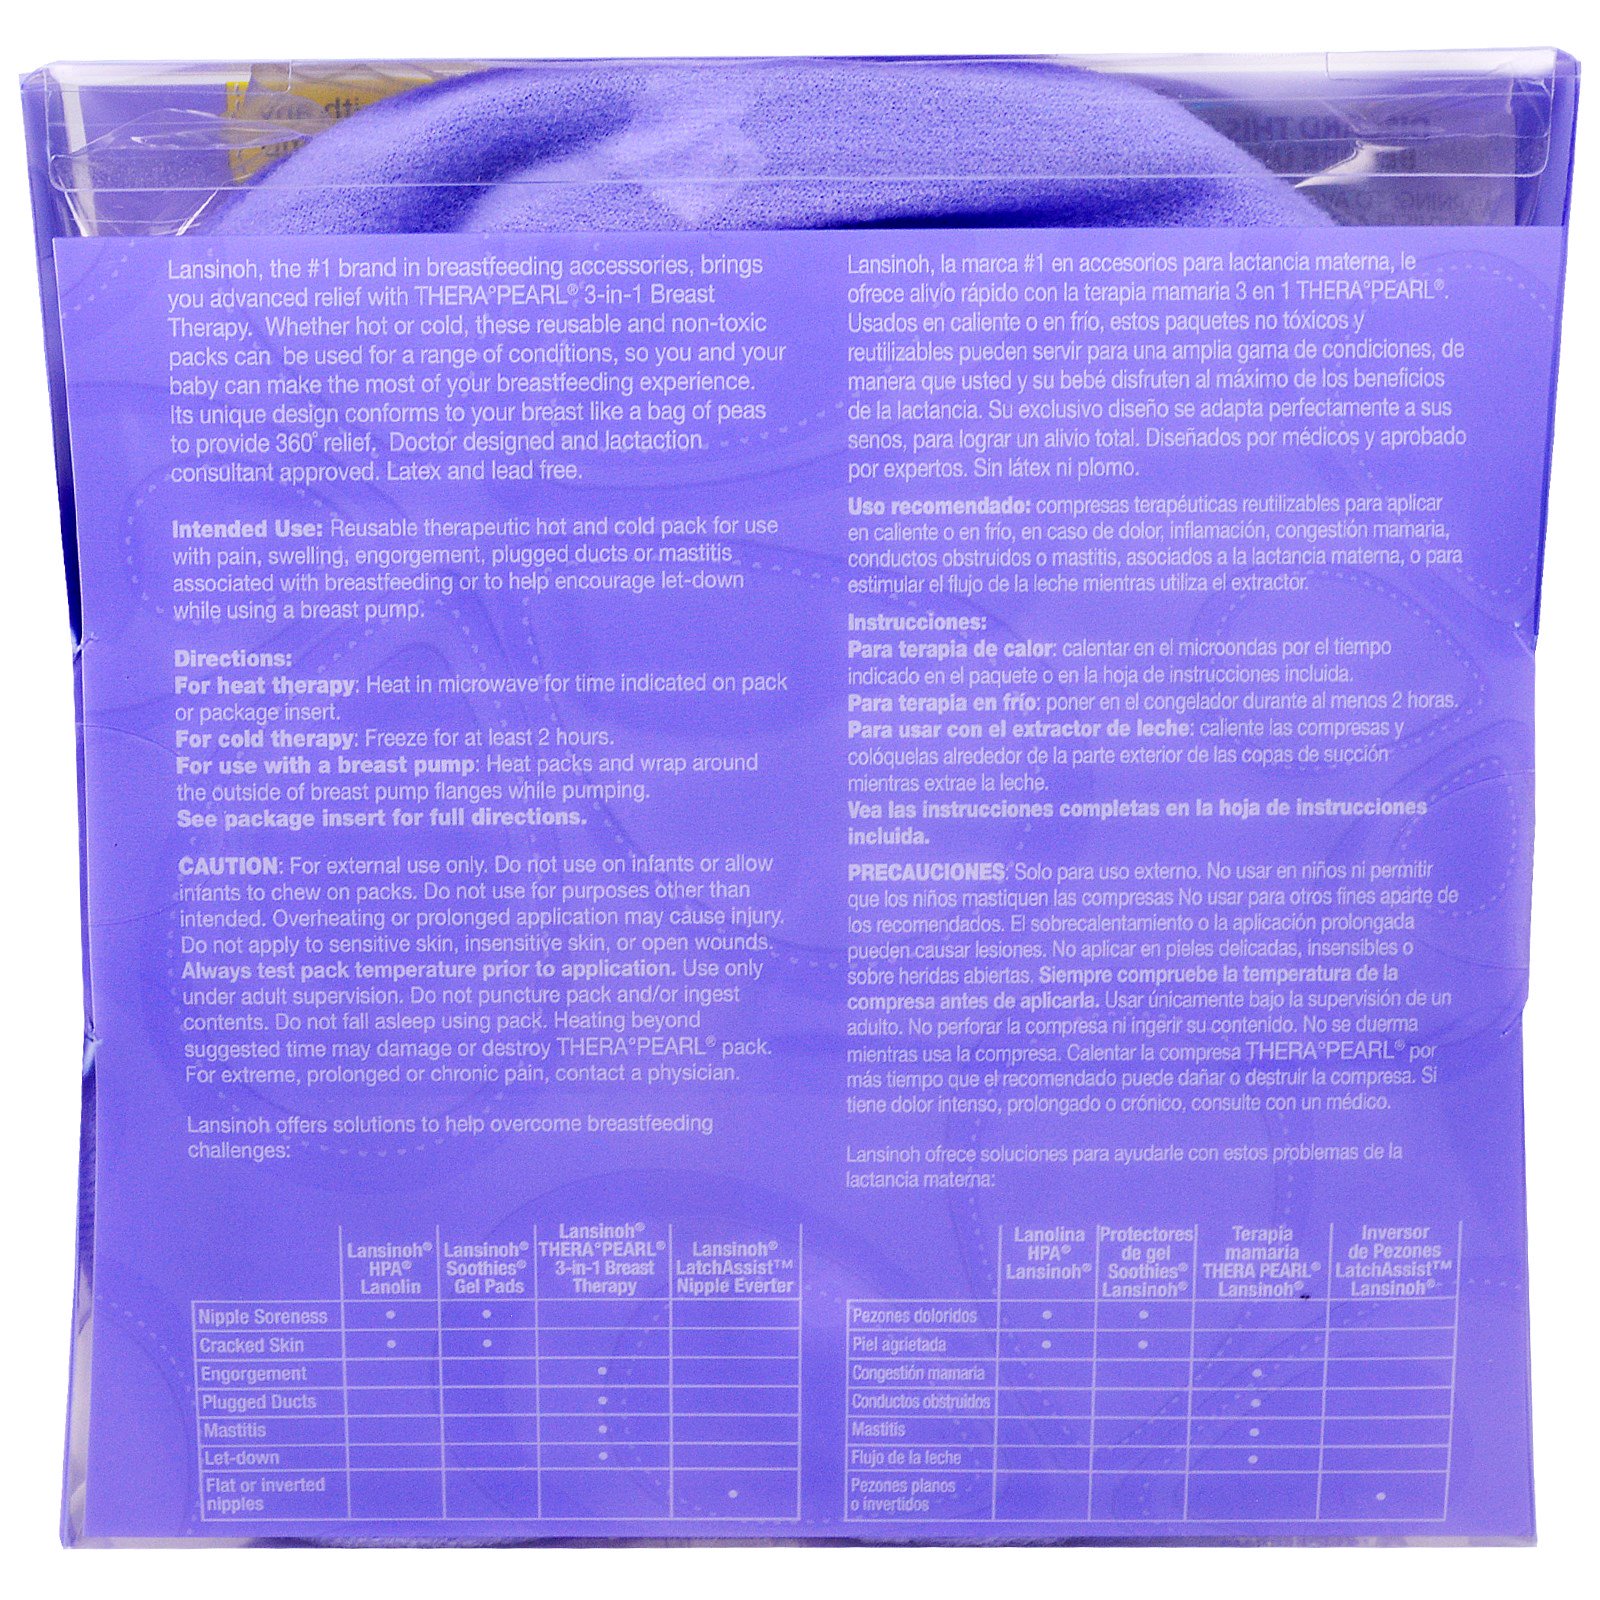 TheraPearl, 3-in-1 Breast Therapy, 2 Reusable Packs and Soft Covers